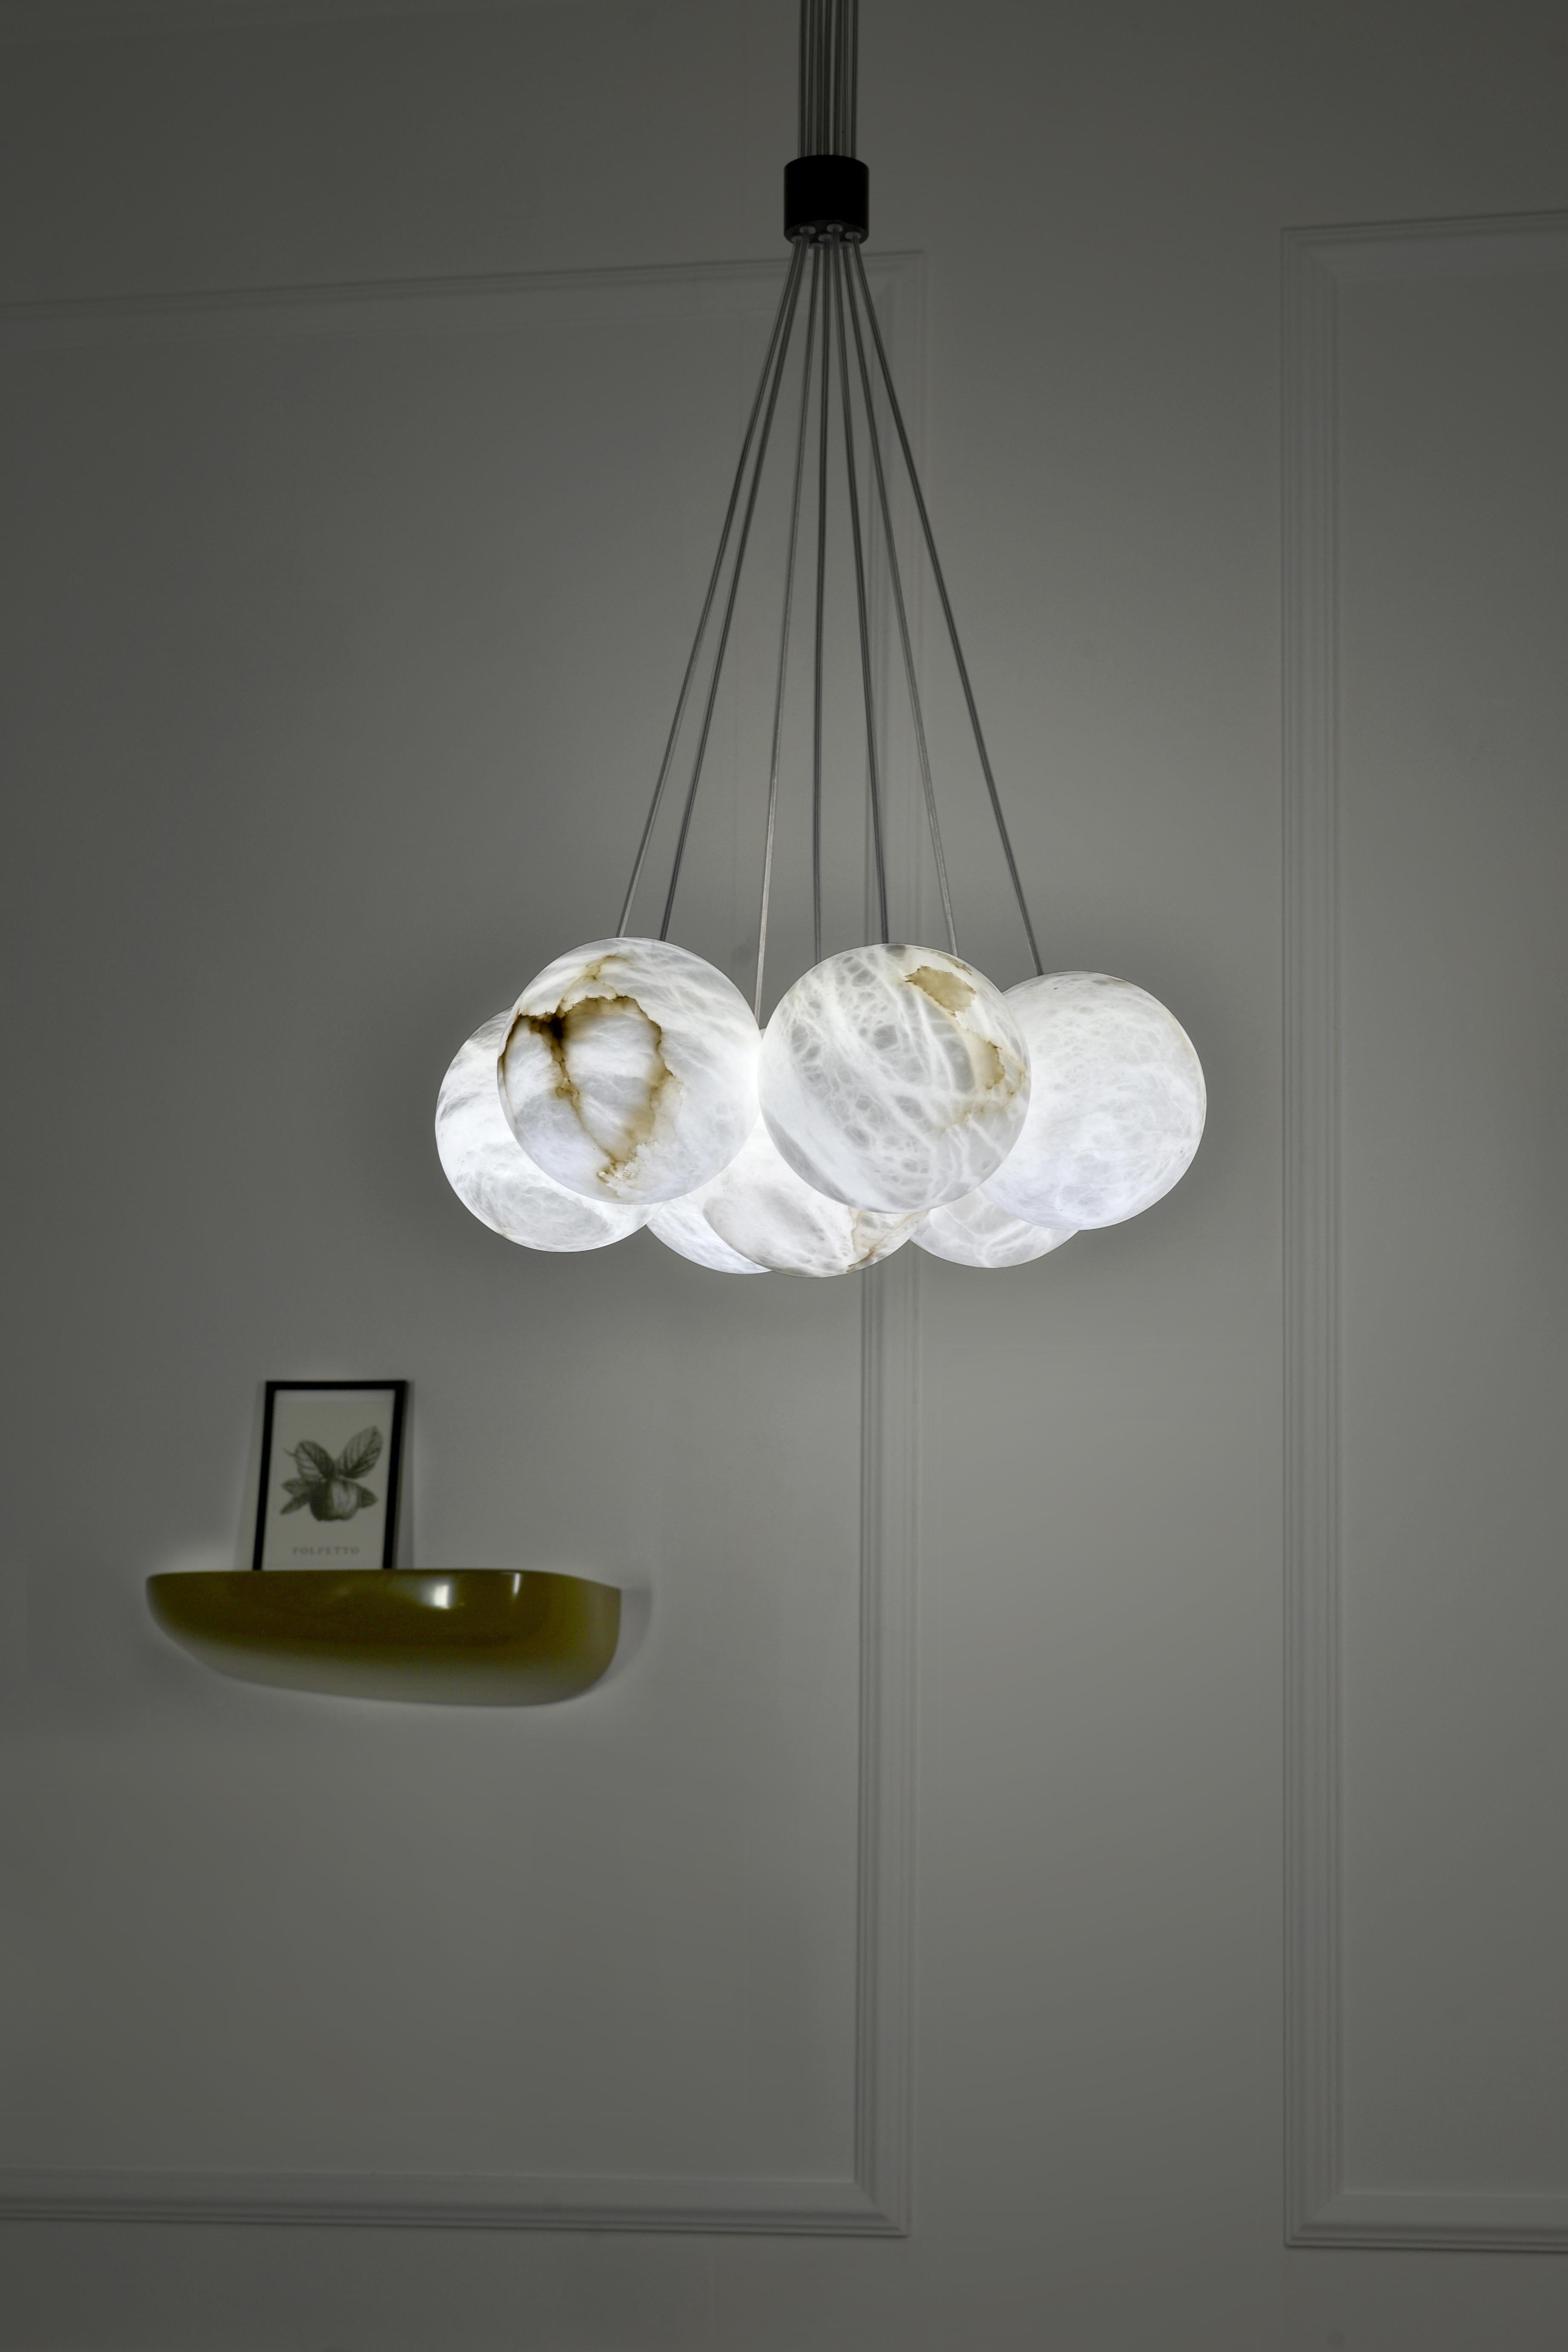 Bolky Up Chandelier by Atelier Alain Ellouz
© Atelier Alain Ellouz 
Dimensions: Ø 17.7 in x h. min. 35.4in
Materials: Bolky up 7 : 7 Alabaster spheres Ø5,9’’, Steel painted mat black
Weight: 20 lb 

Suspension system: Wire + transparent cable
